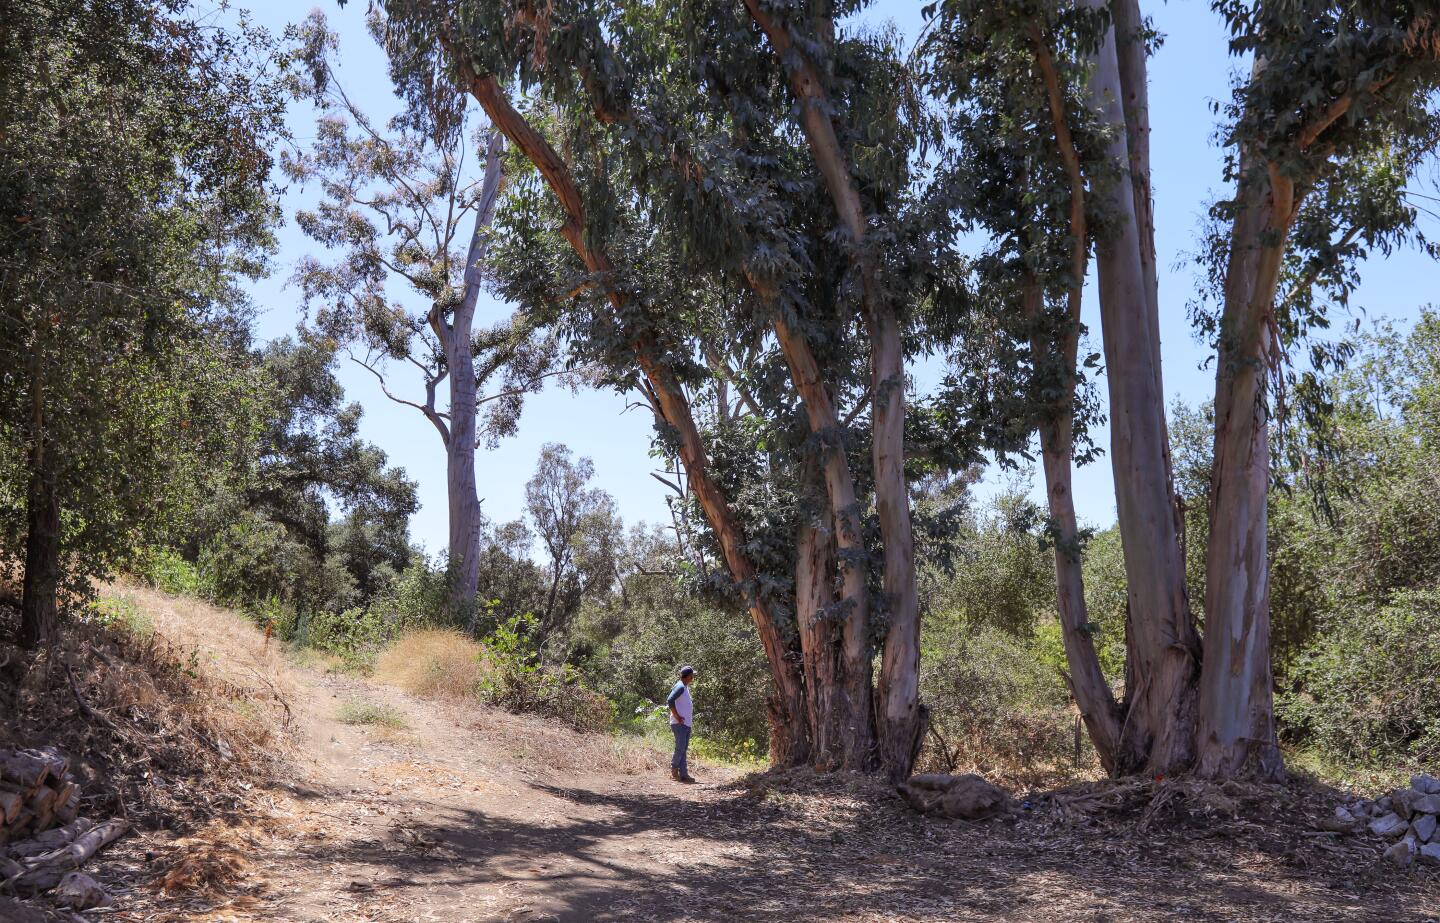 Richard Viles walks among large Eucalyptus trees at Sand N' Straw Community Farm. He owns the farm with his wife April.